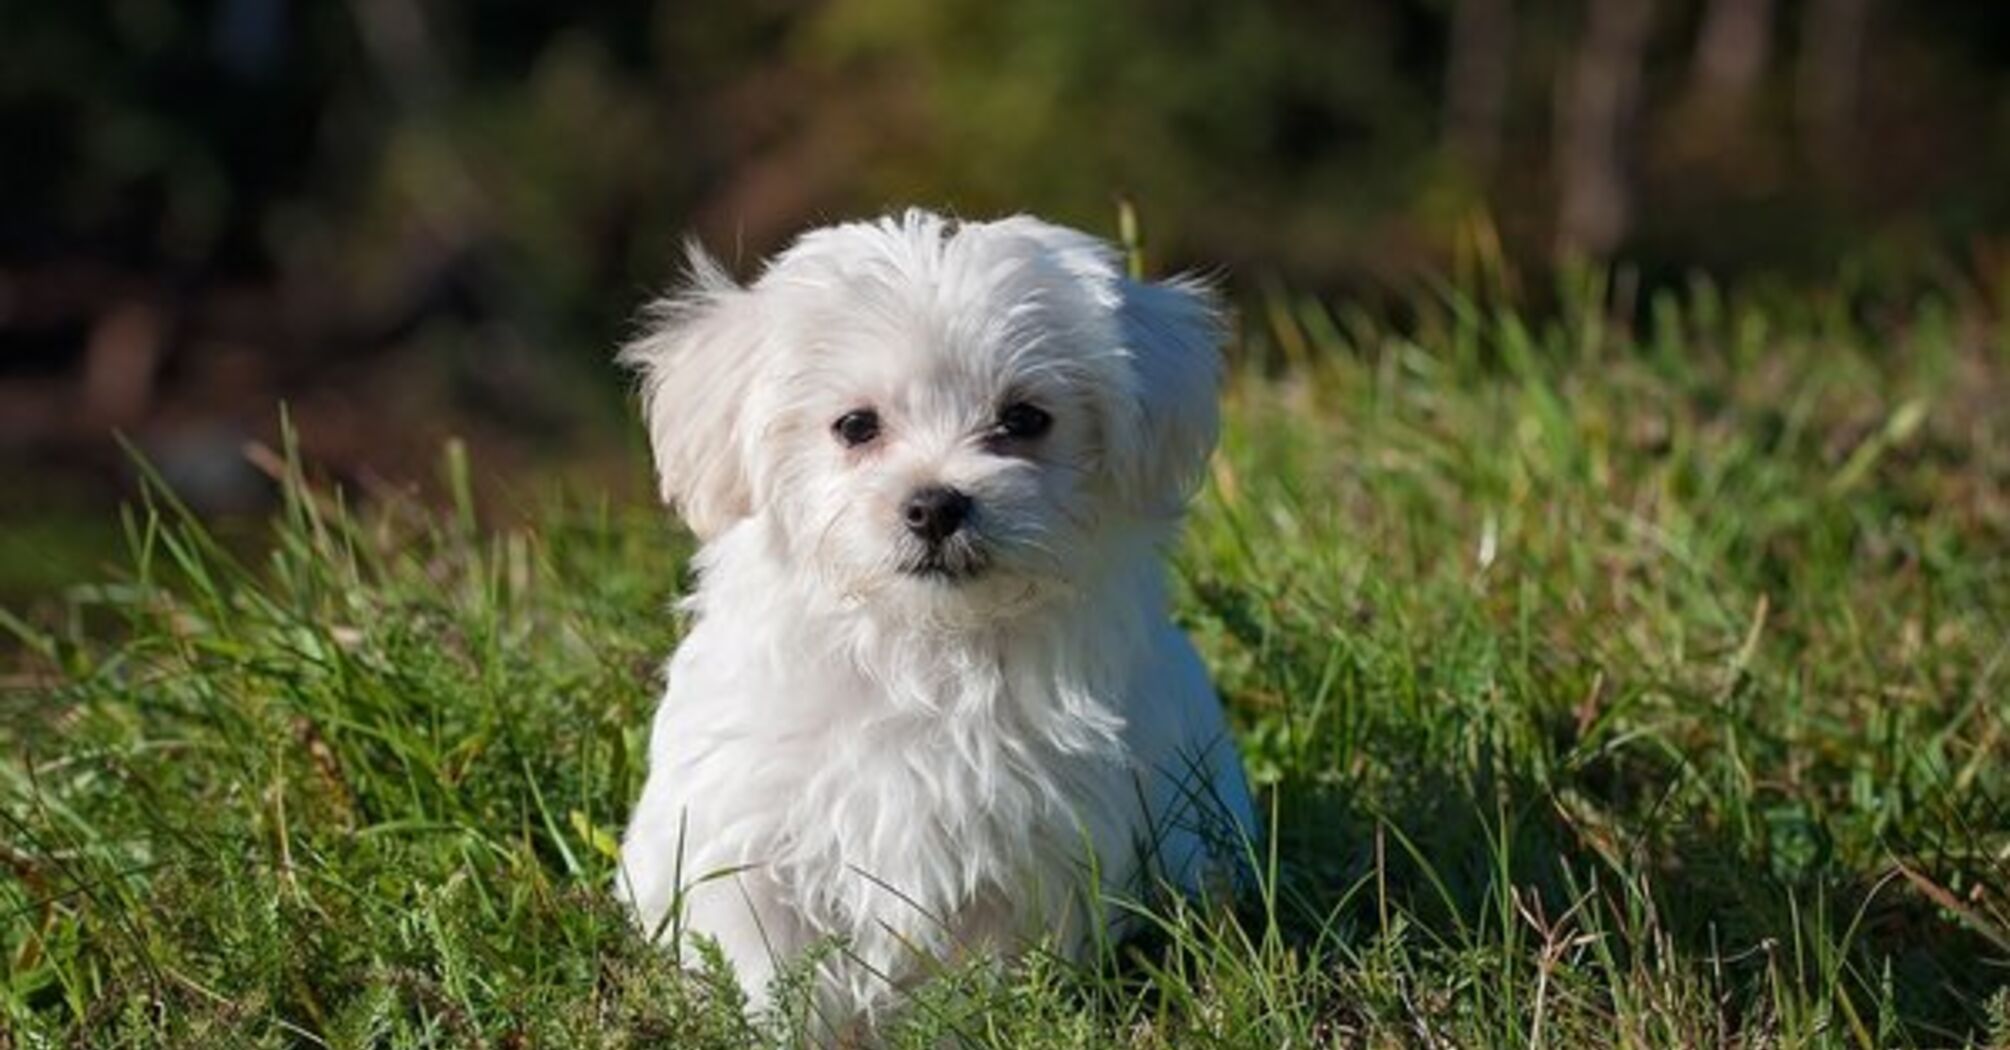 Advantages and disadvantages of keeping small dogs